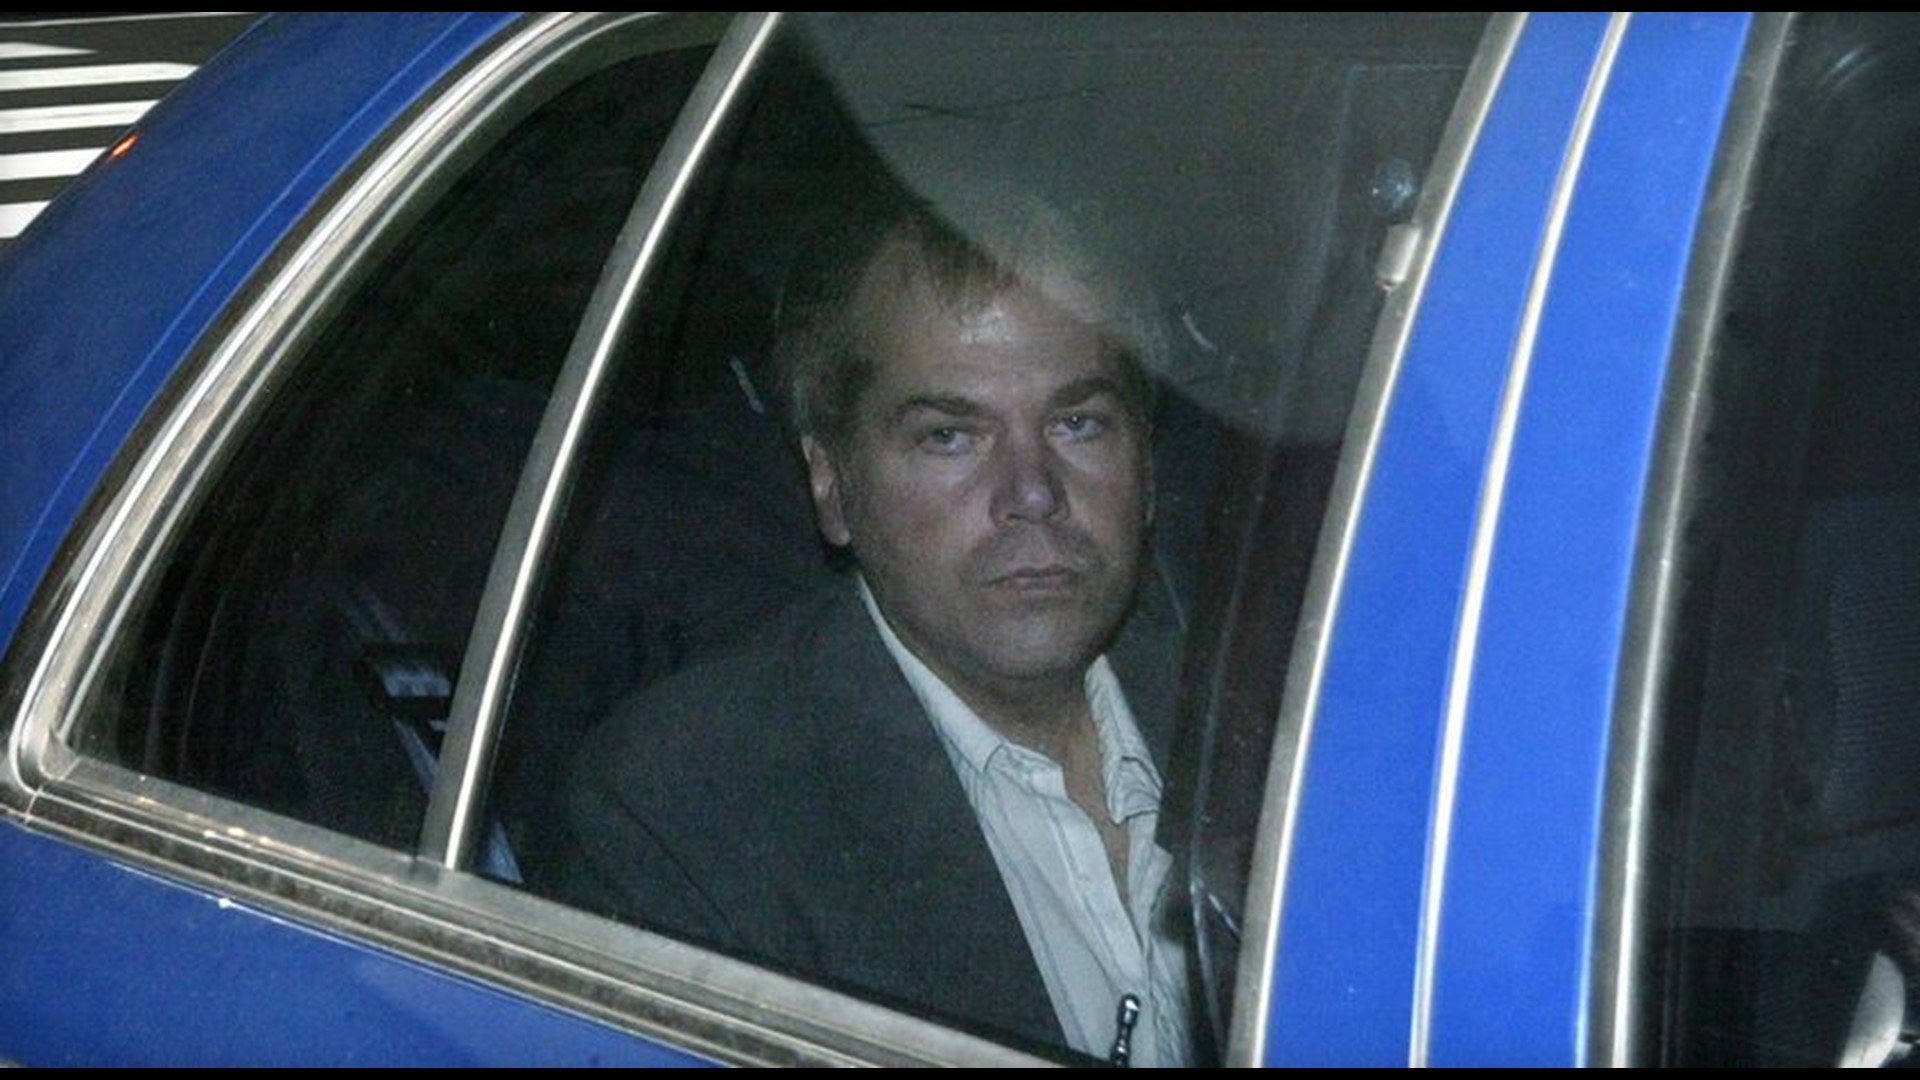 John Hinckley Jr. attempted to assassinate President Ronald Reagan in 1981. He was found not guilty of attempted murder and other charges by reason of insanity.